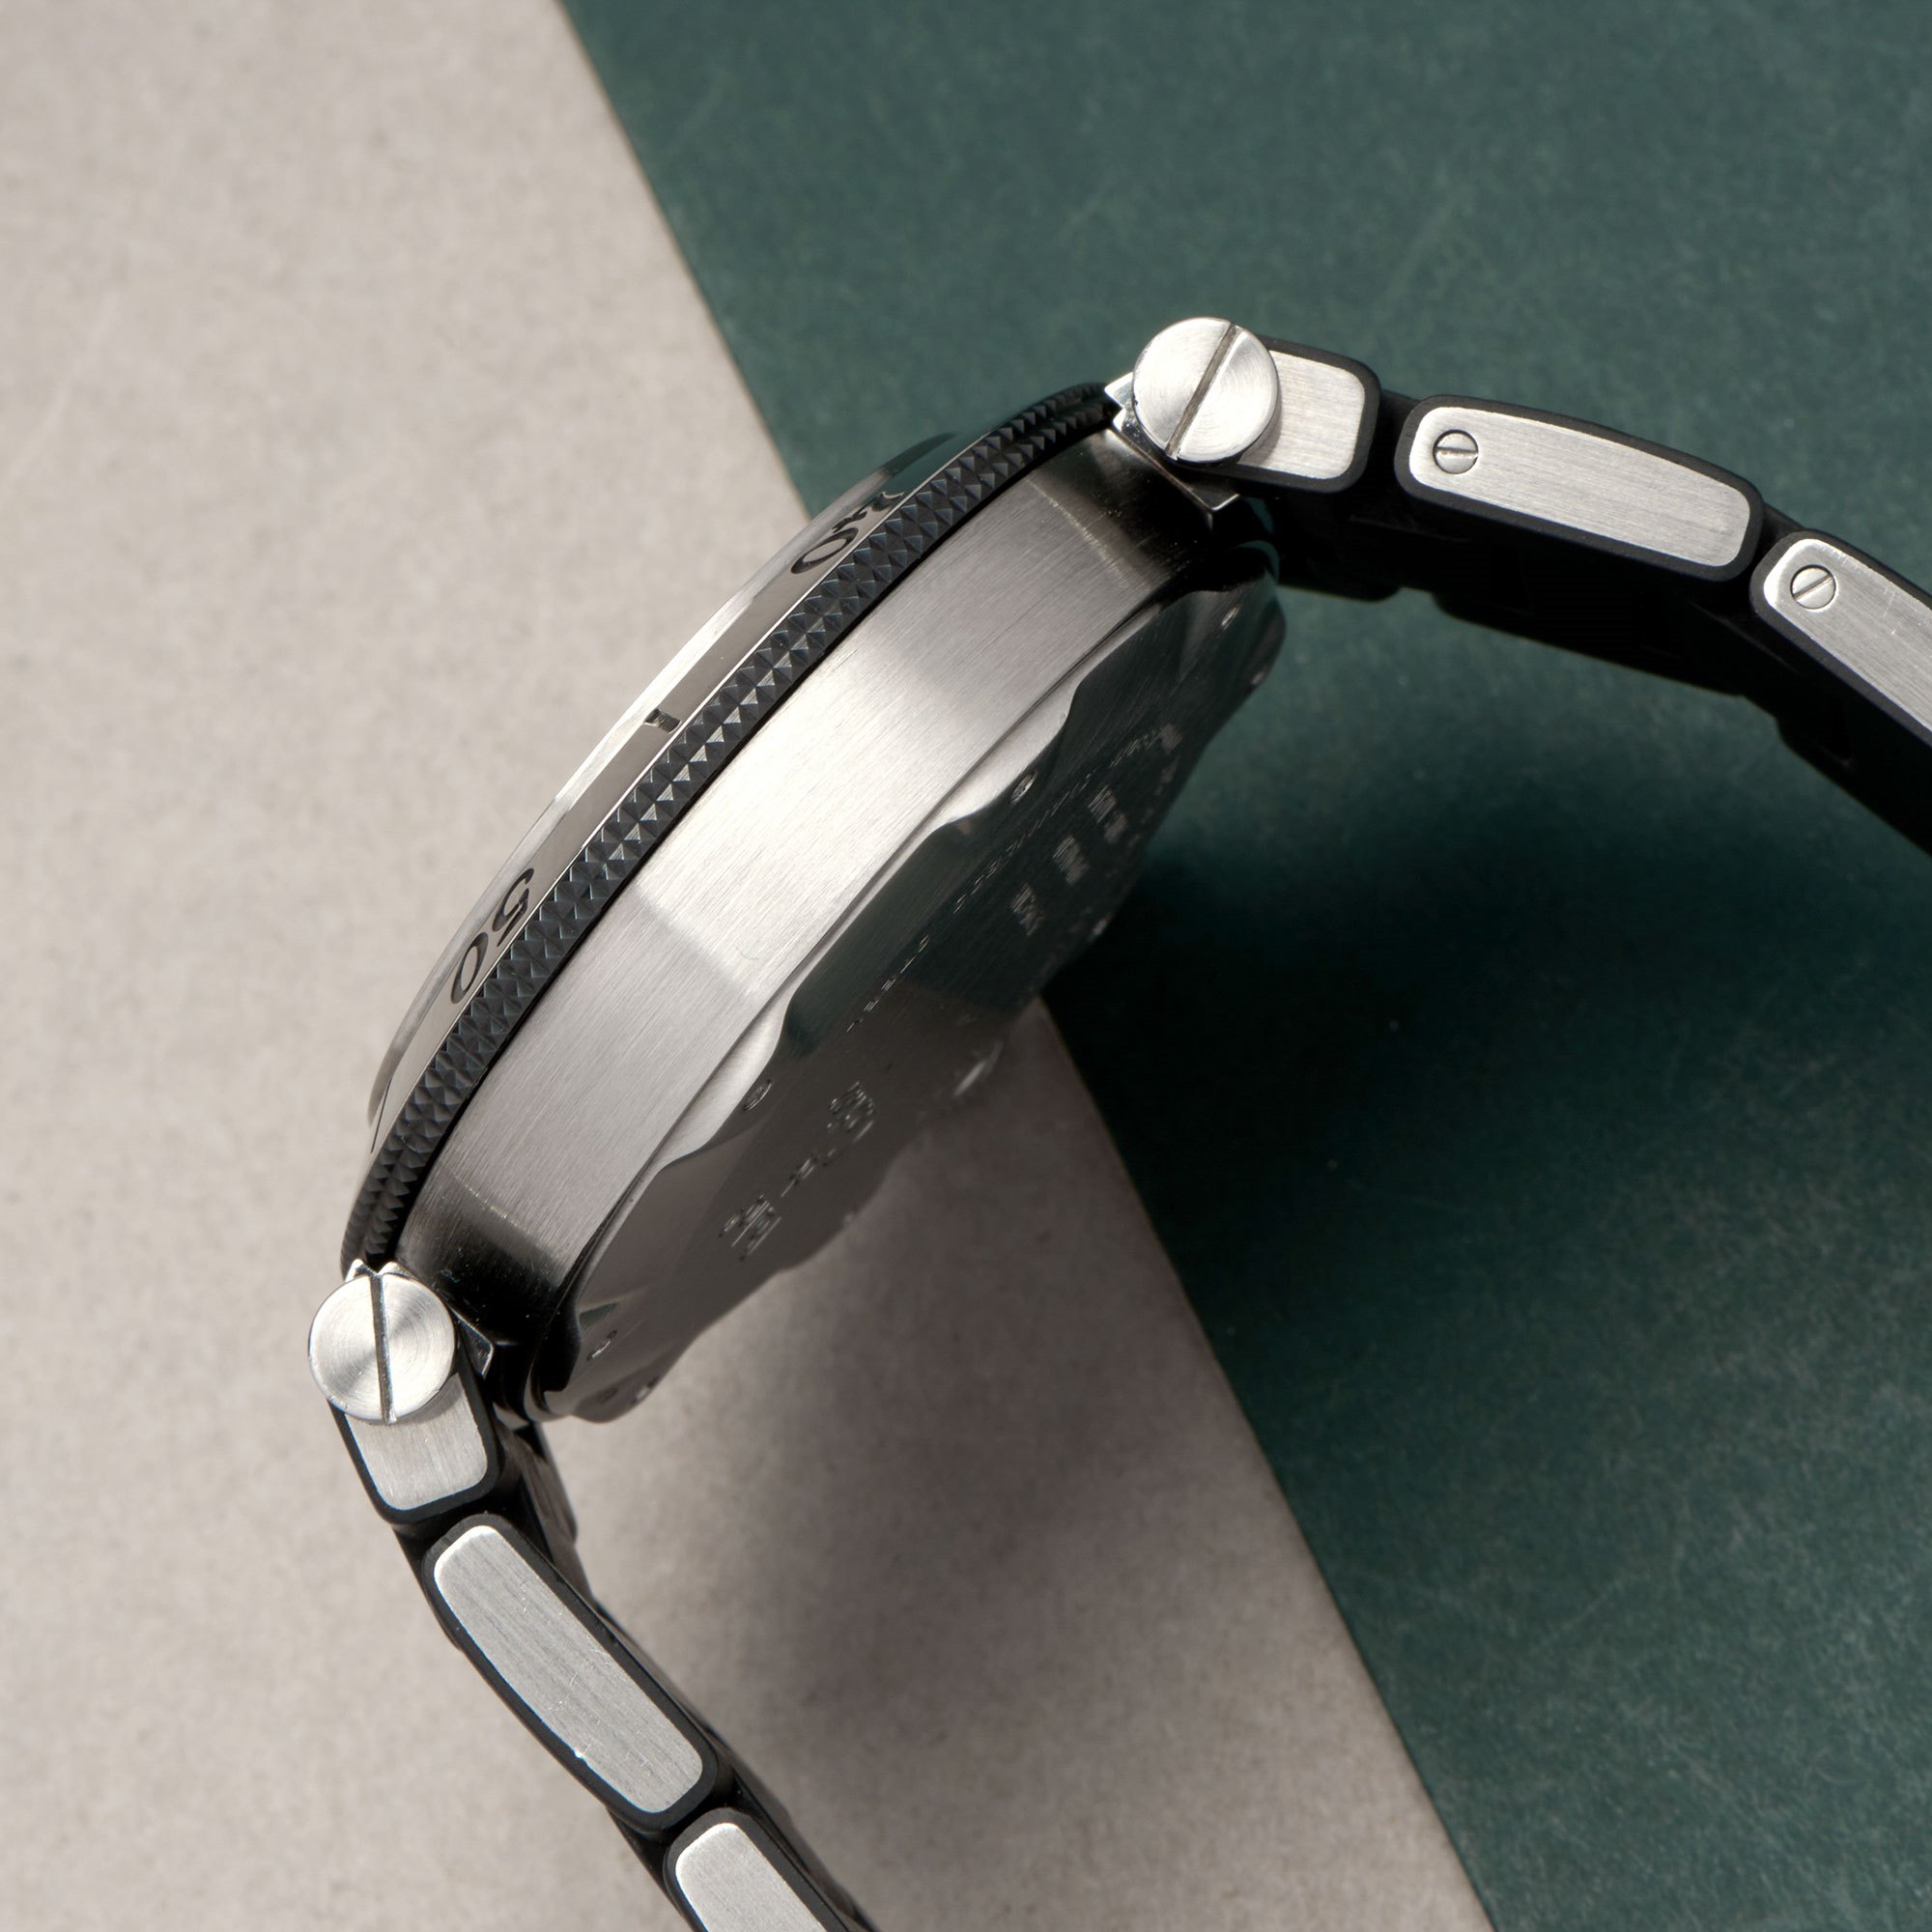 Cartier Pasha Stainless Steel 2790